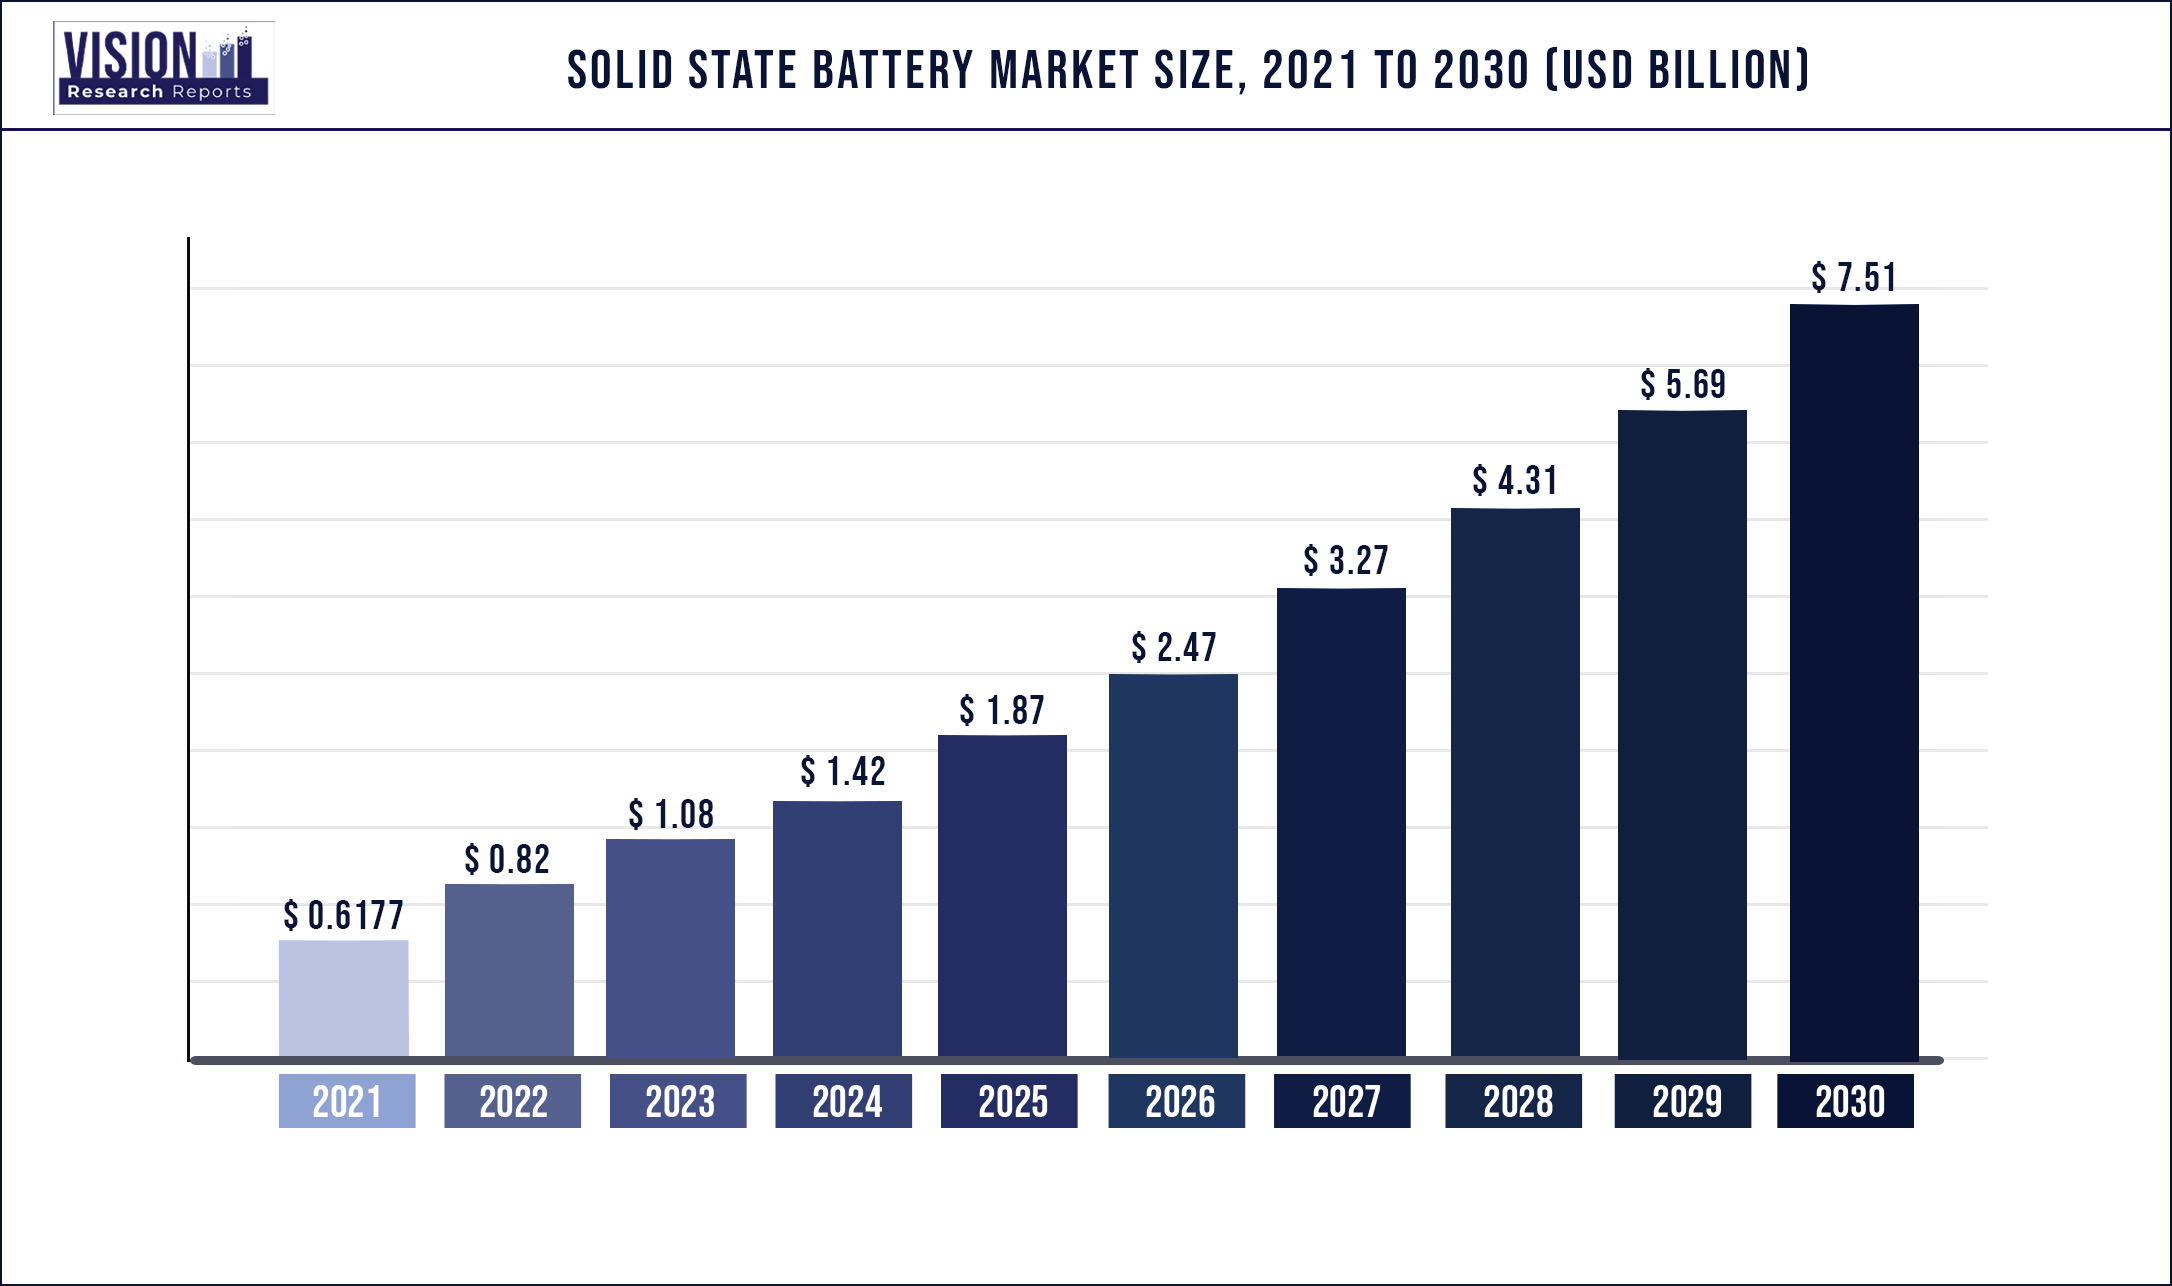 Solid State Battery Market Size 2021 to 2030